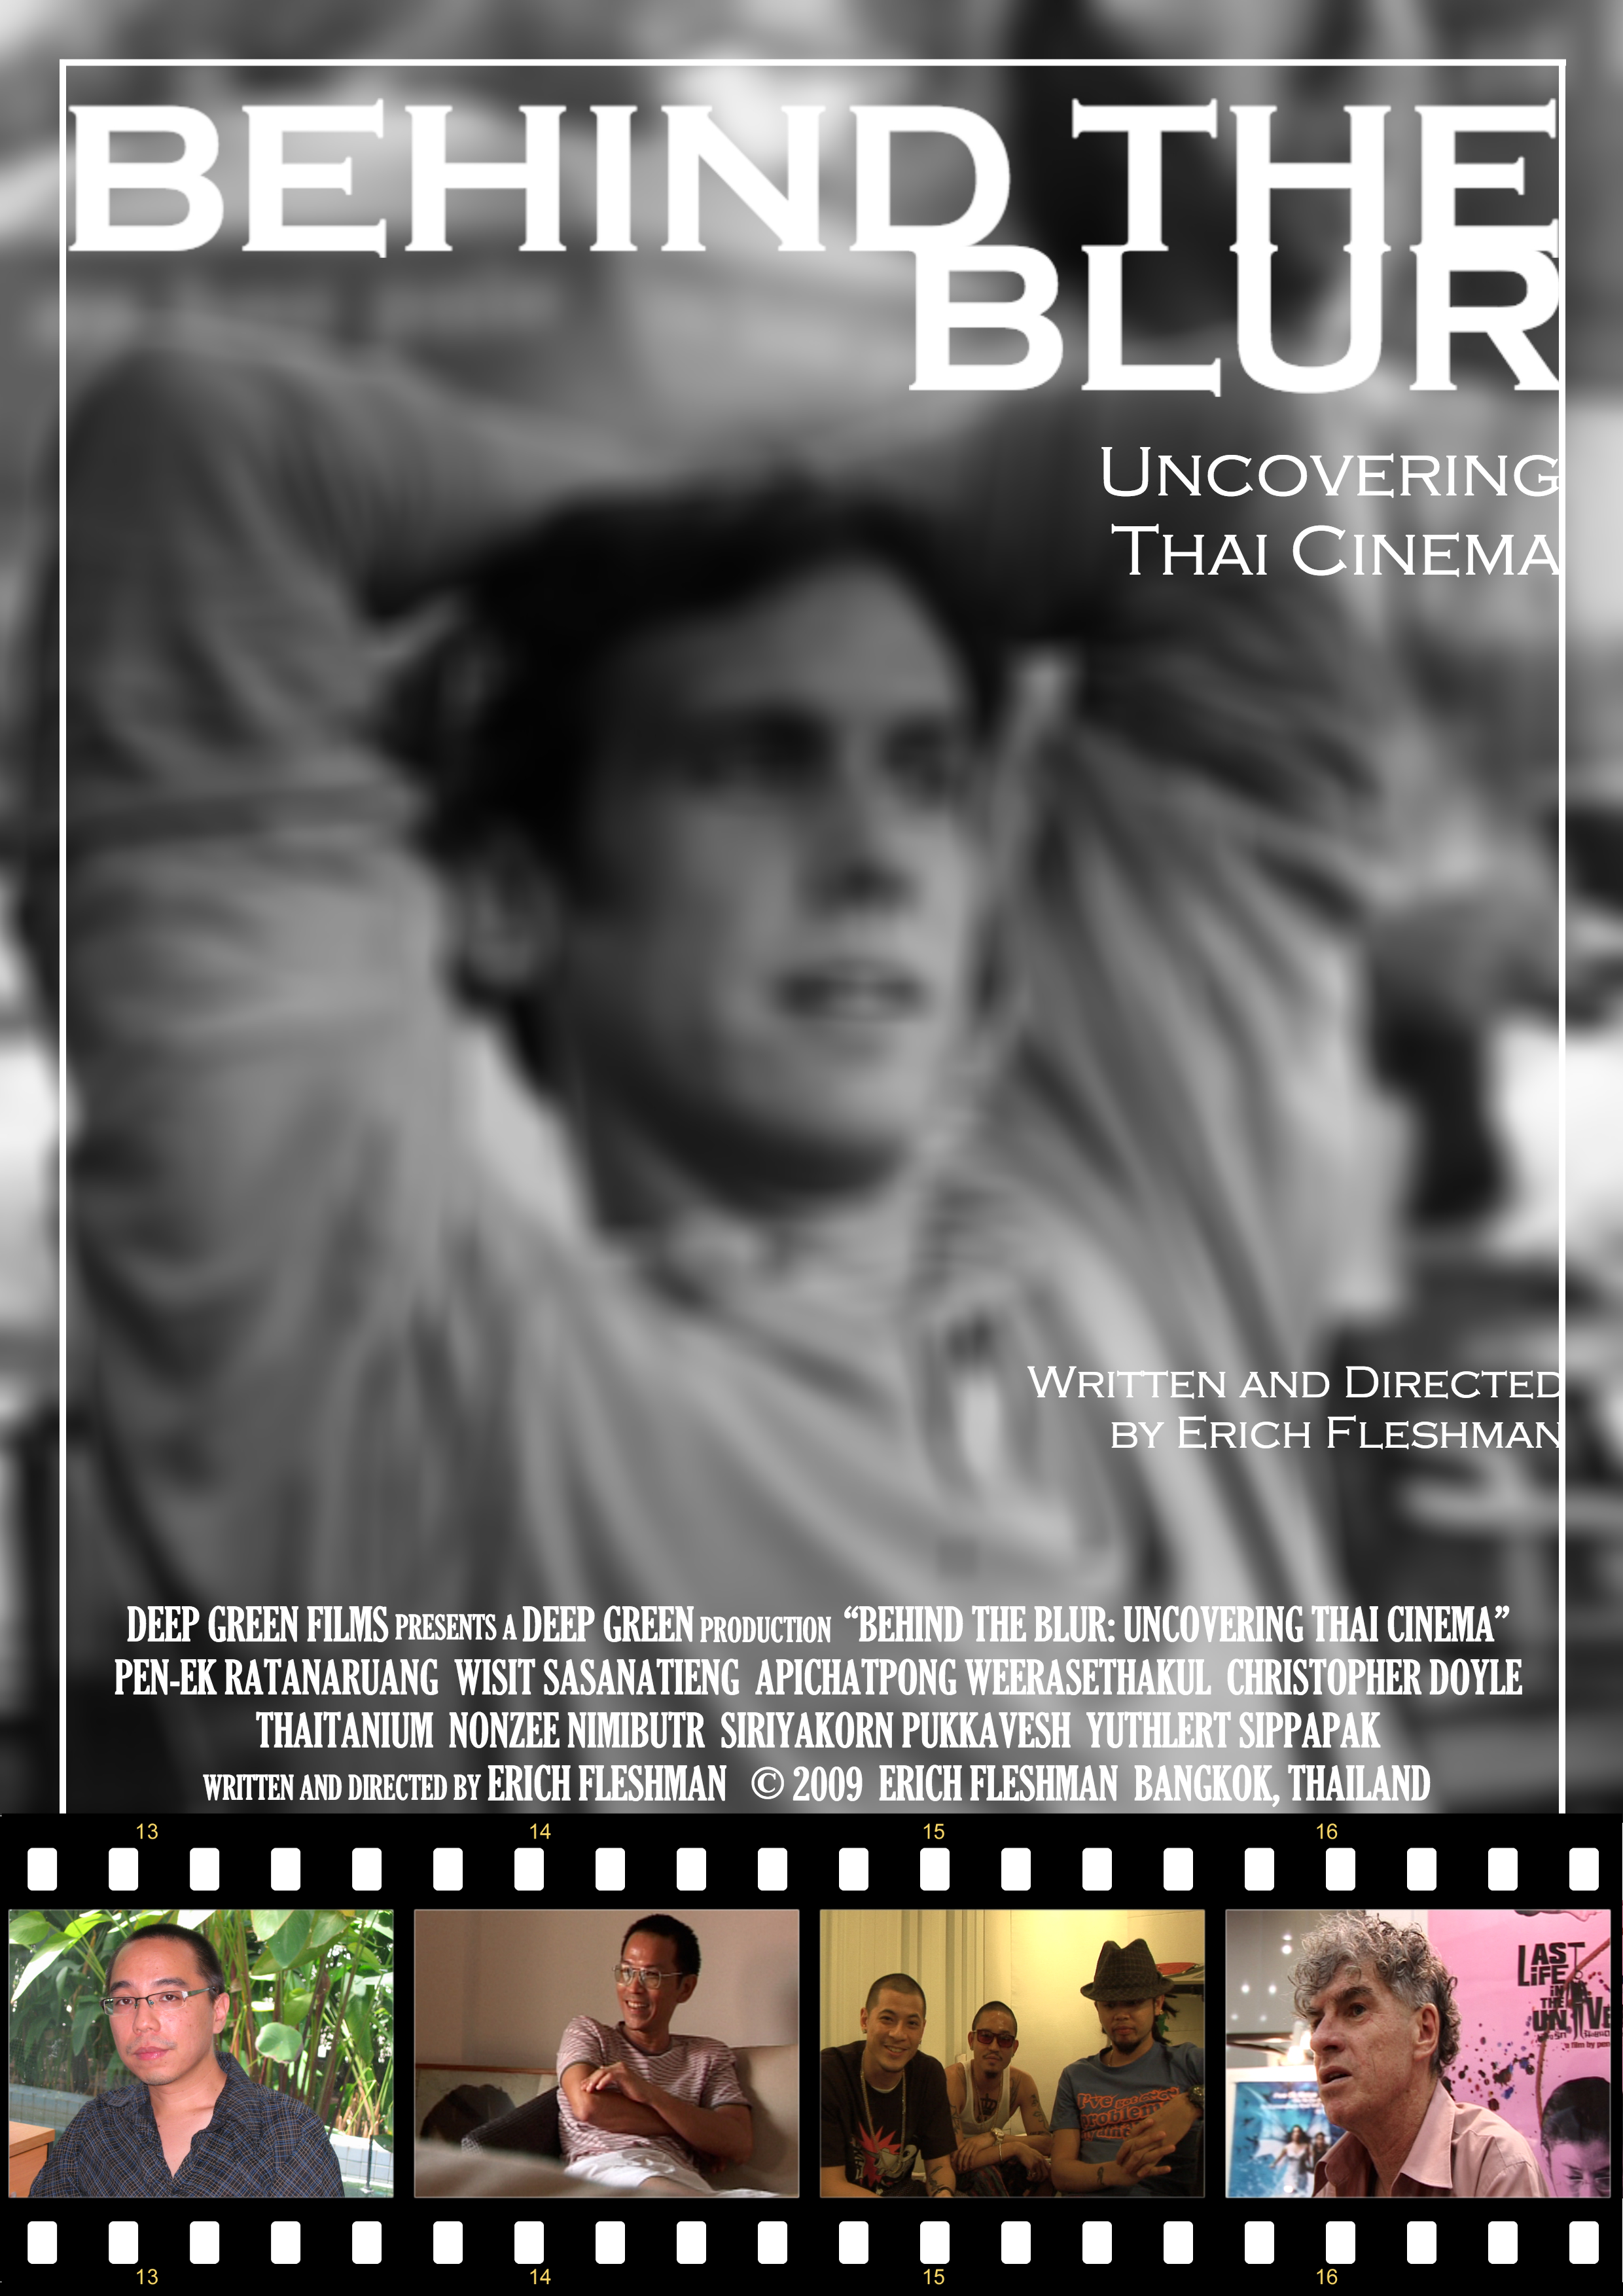 Film poster for Behind the Blur by Erich Fleshman.